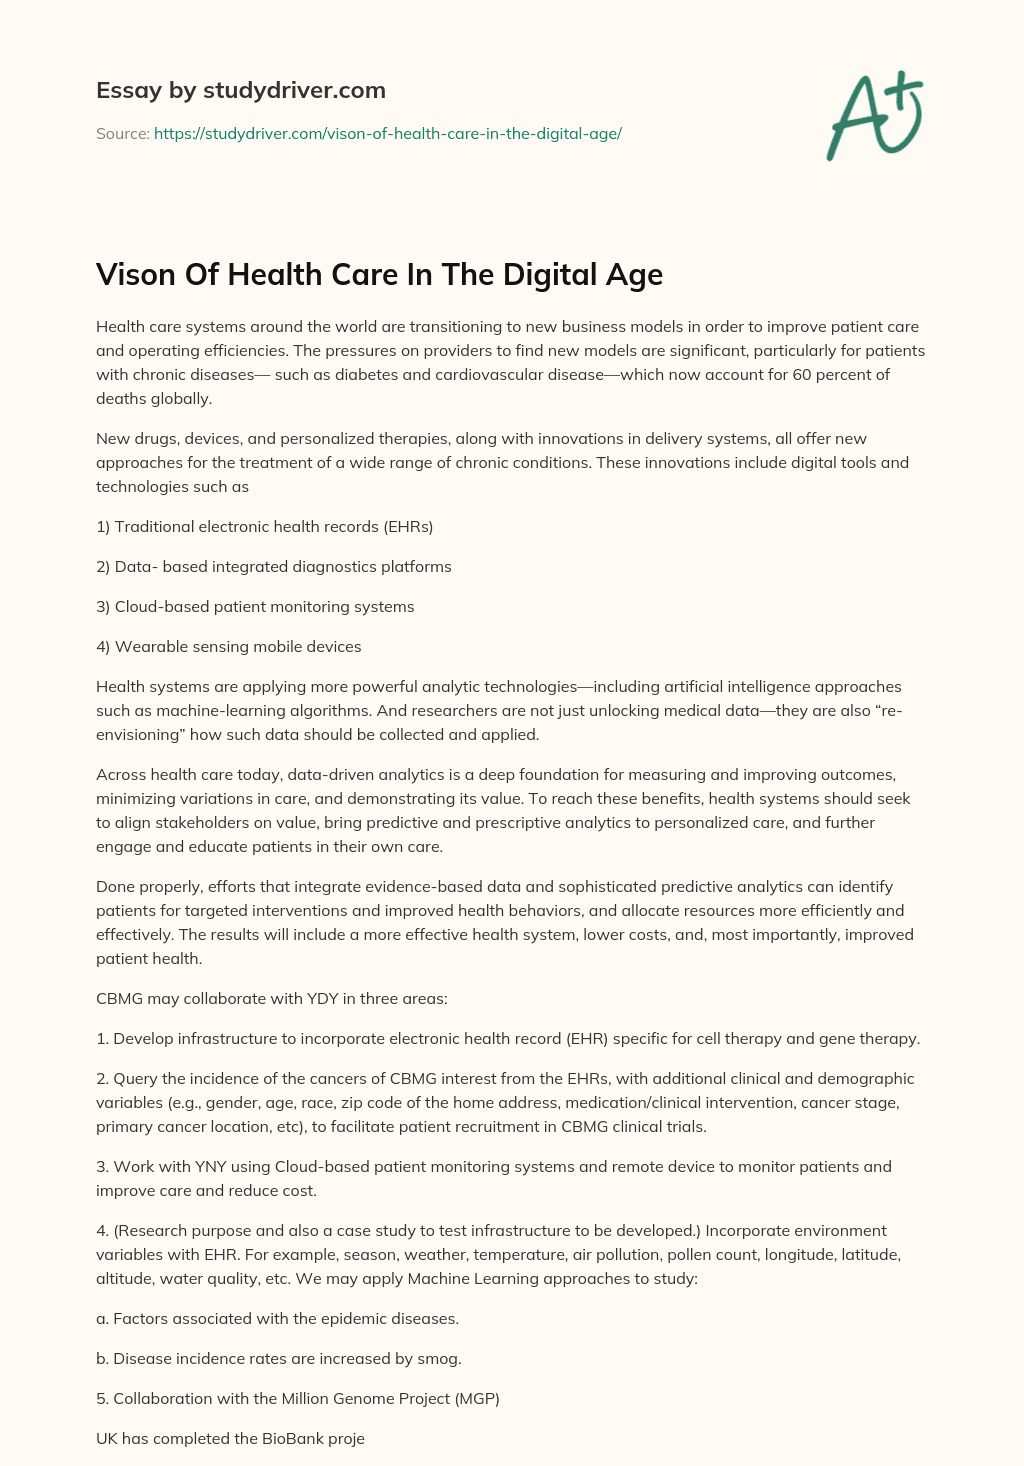 Vison of Health Care in the Digital Age essay